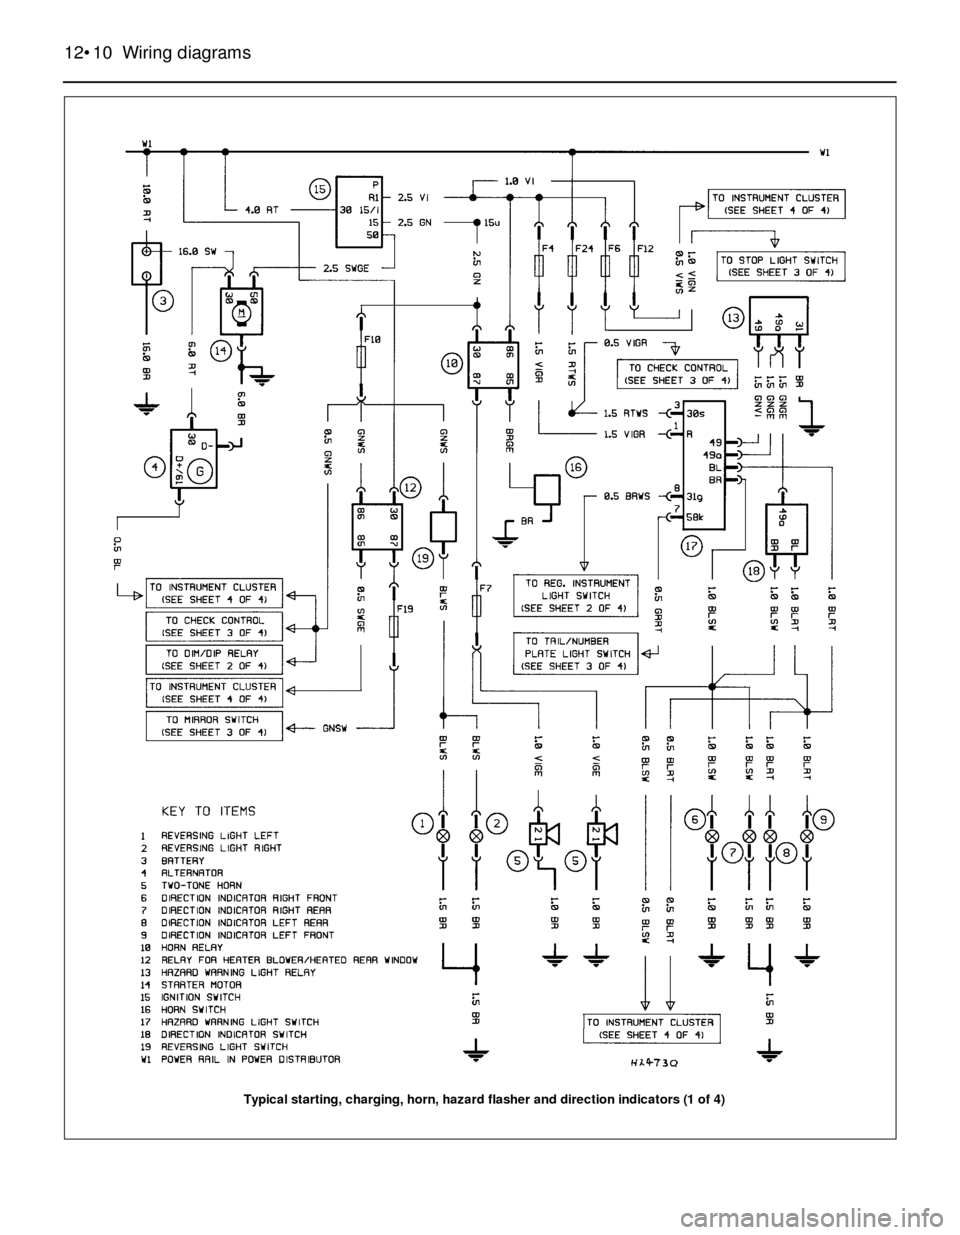 BMW 3 SERIES 1985 E30 Workshop Manual 12•10 Wiring diagrams
Typical starting, charging, horn, hazard flasher and direction indicators (1 of 4) 